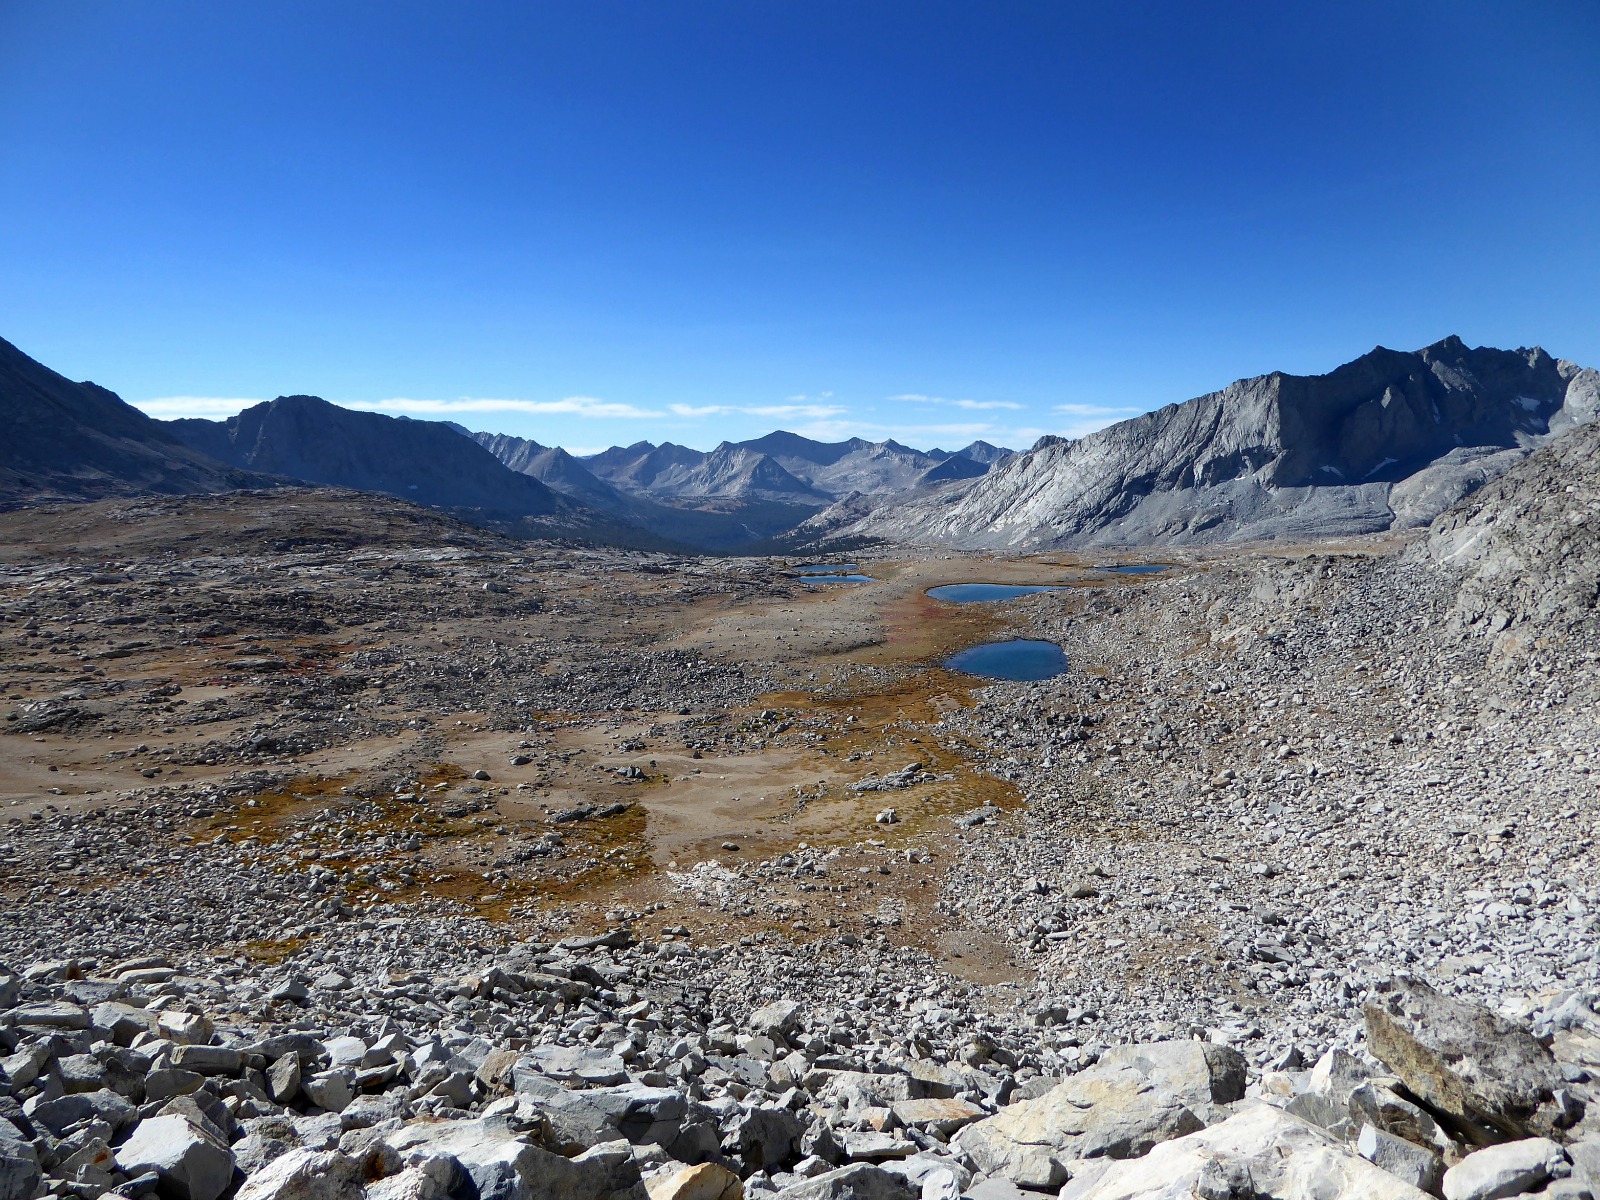 A Sierra view of mountains, lakes, and talus